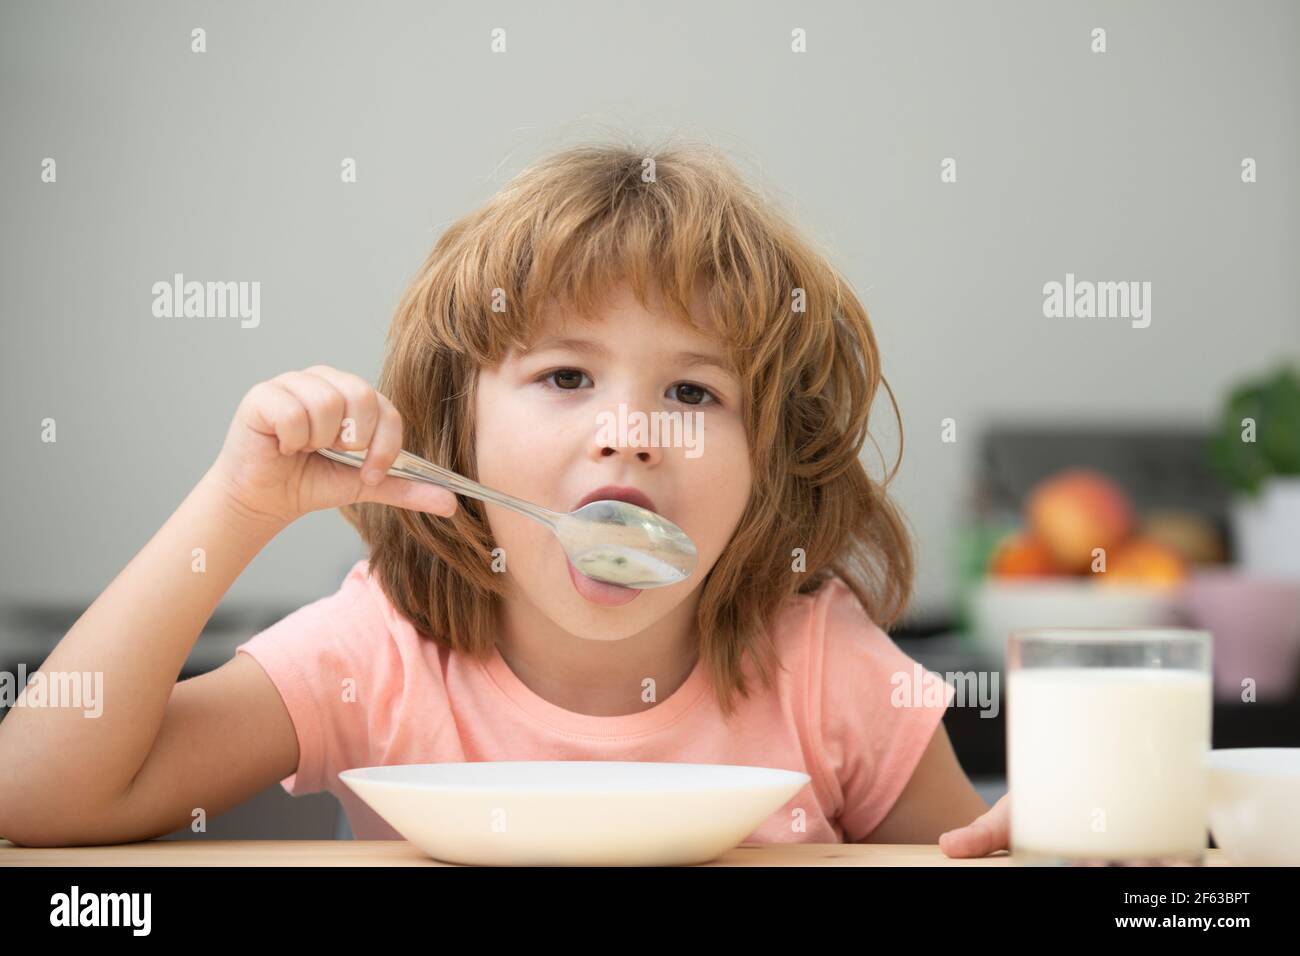 Child eating healthy food. Cute little boy having soup for lunch. Child nutrition. Stock Photo